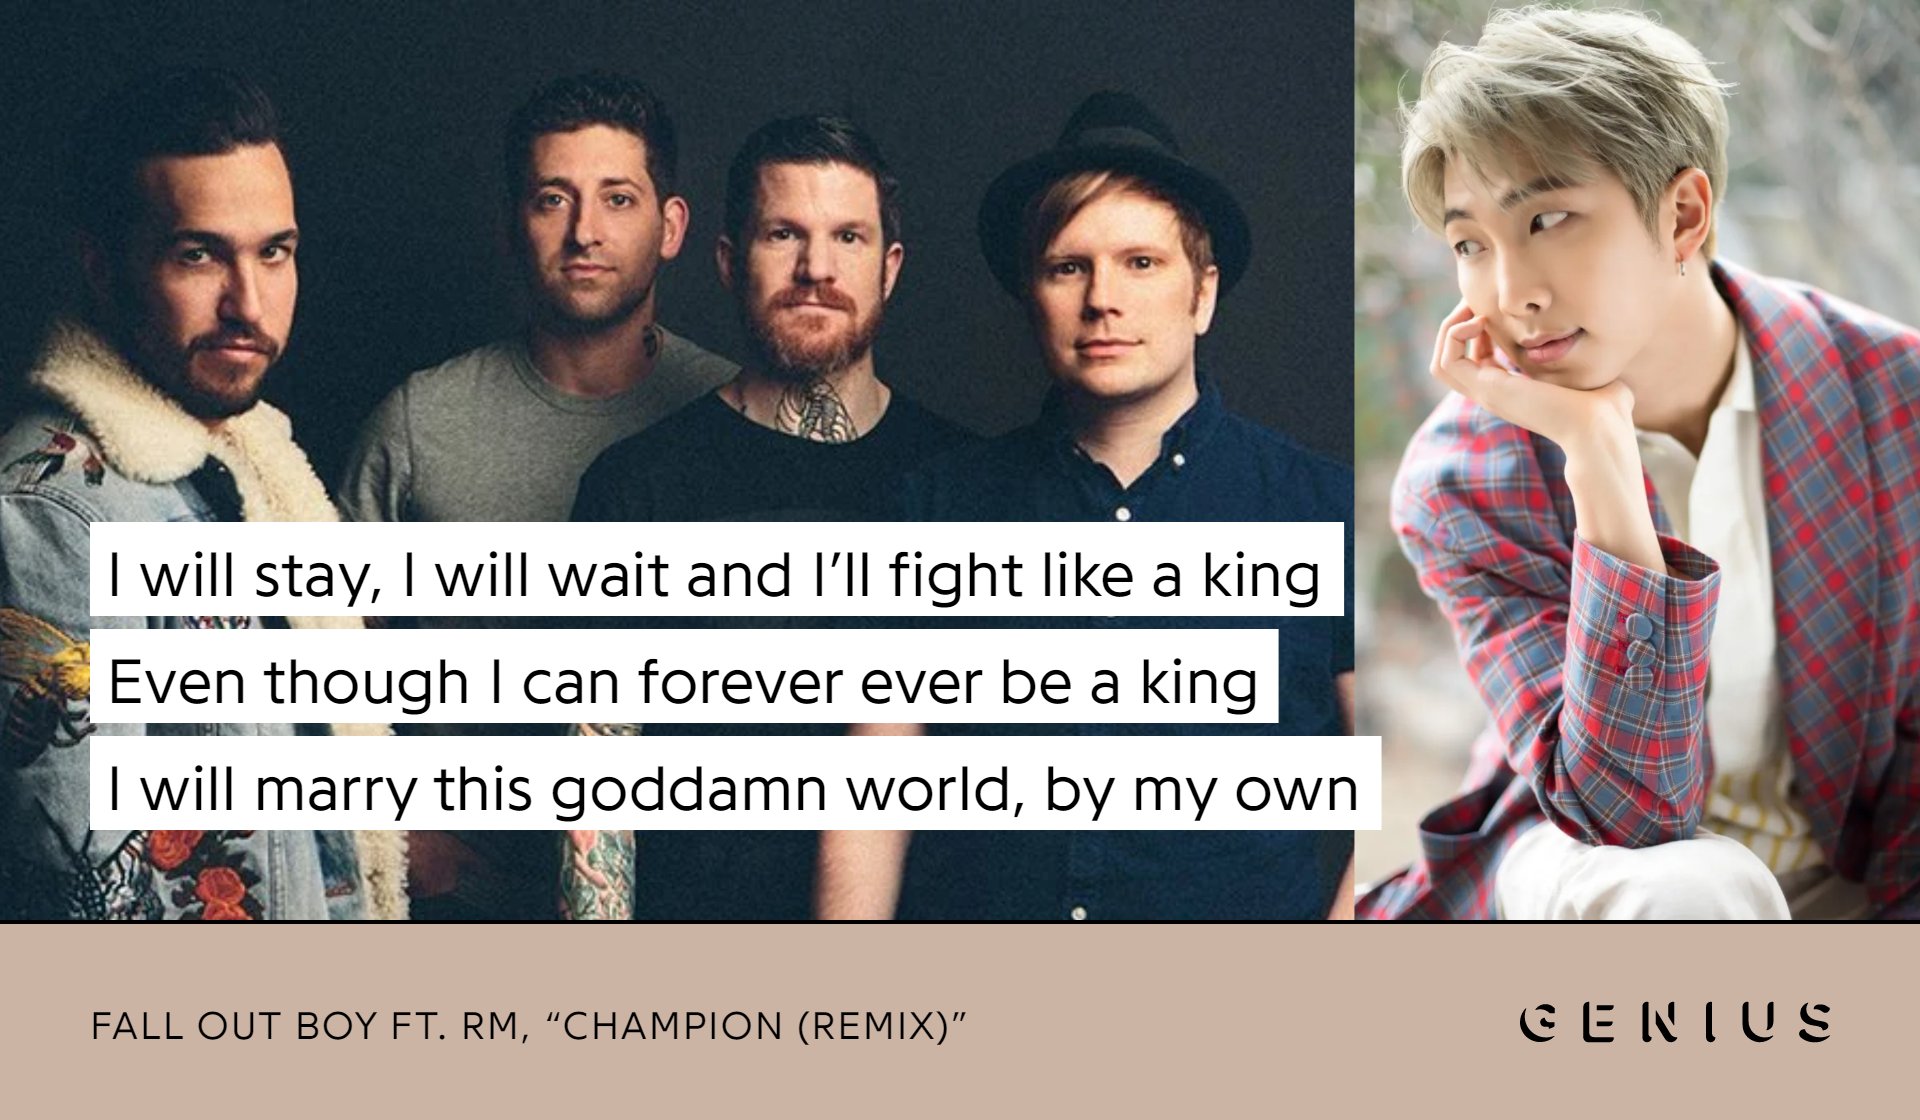 Halvtreds Sørge over Slibende Genius Korea on Twitter: "3 years ago, Fall Out Boy collaborated with RM,  to remix their summer single “Champion"! The song was co-written by Pete  Wentz, Patrick Stump, Sia & had 2